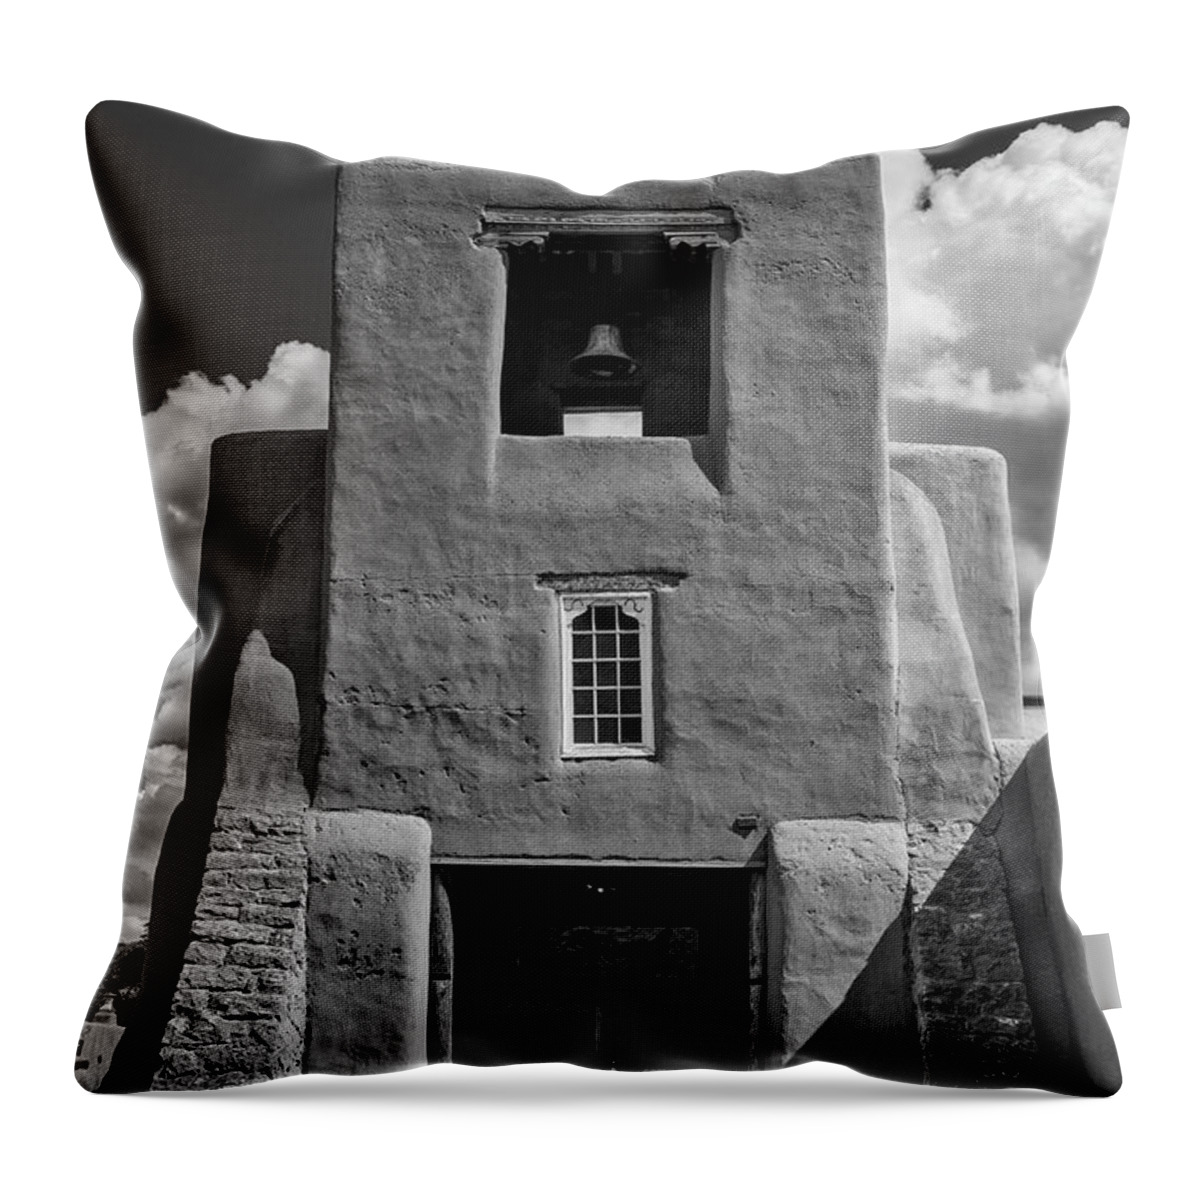 Landmark Throw Pillow featuring the photograph San Miguel Mission Black And White by Garry Gay